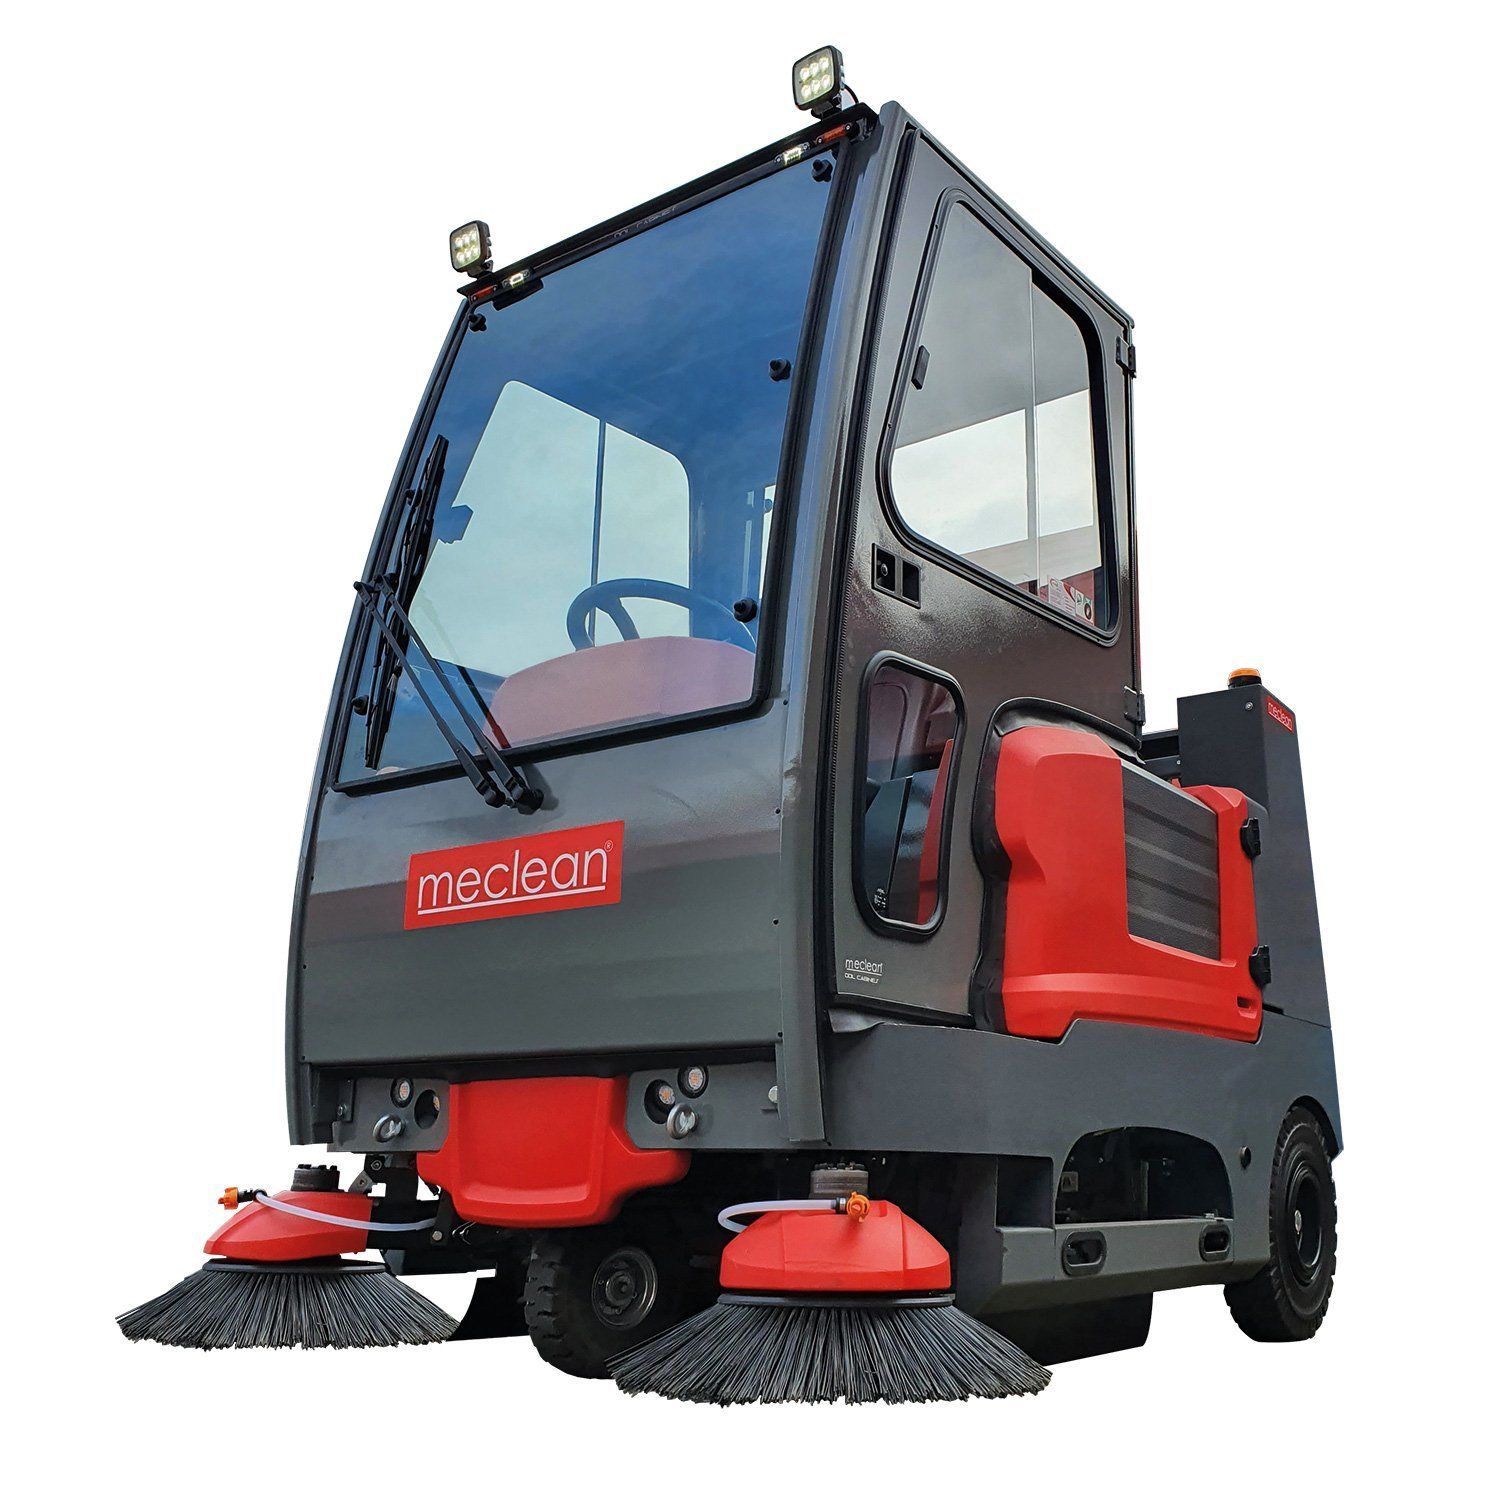 Meclean professional industrial ride-on sweeper diesel powered BUSTER 1800 HB/G CAB